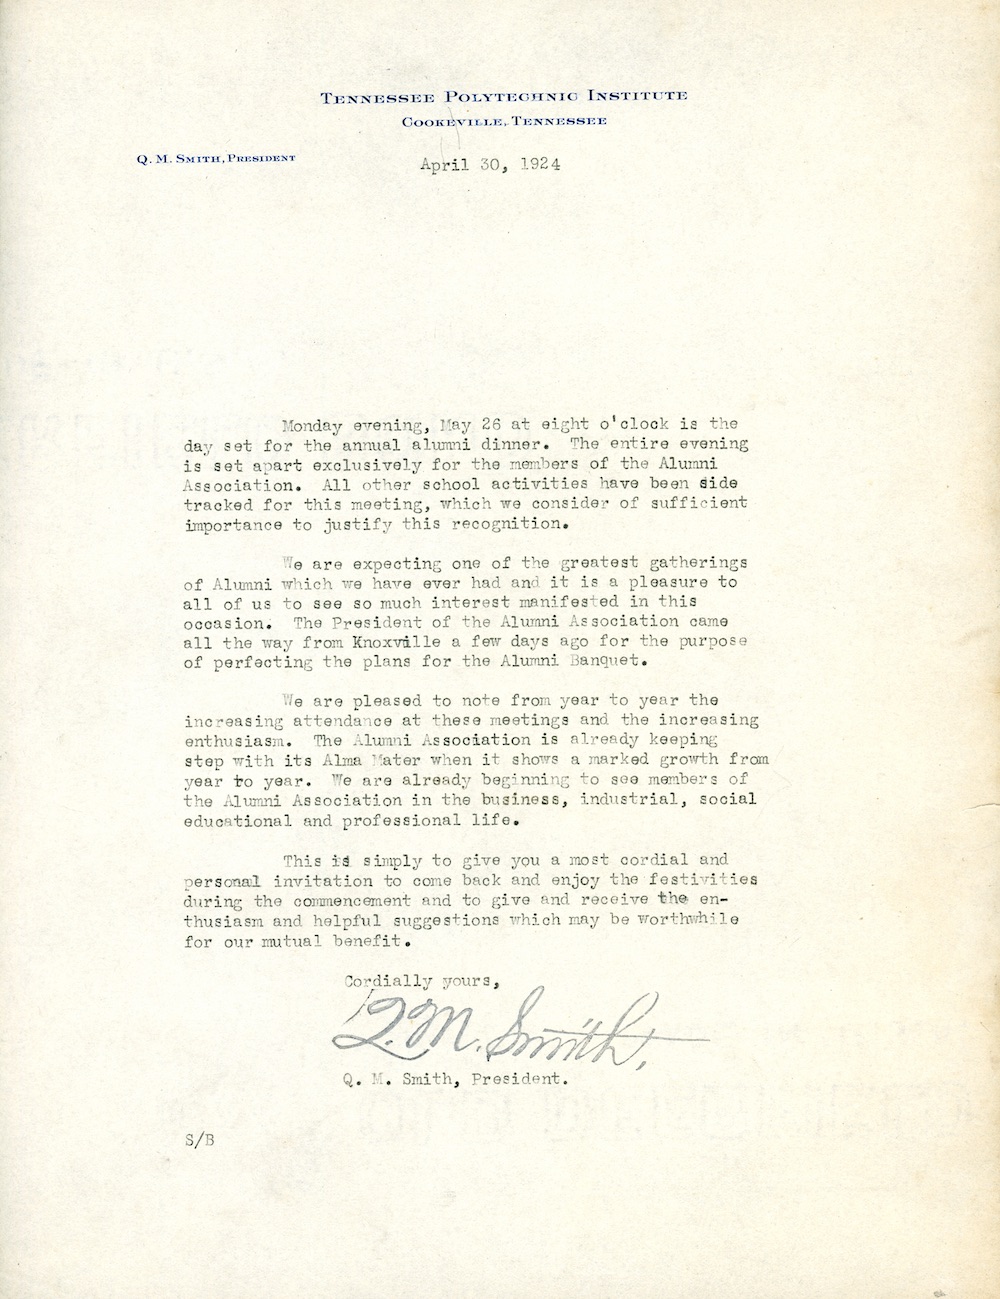 A letter from Tech President dated April 30, 1924 inviting alumni to attend the annual alumni dinner on May 26.